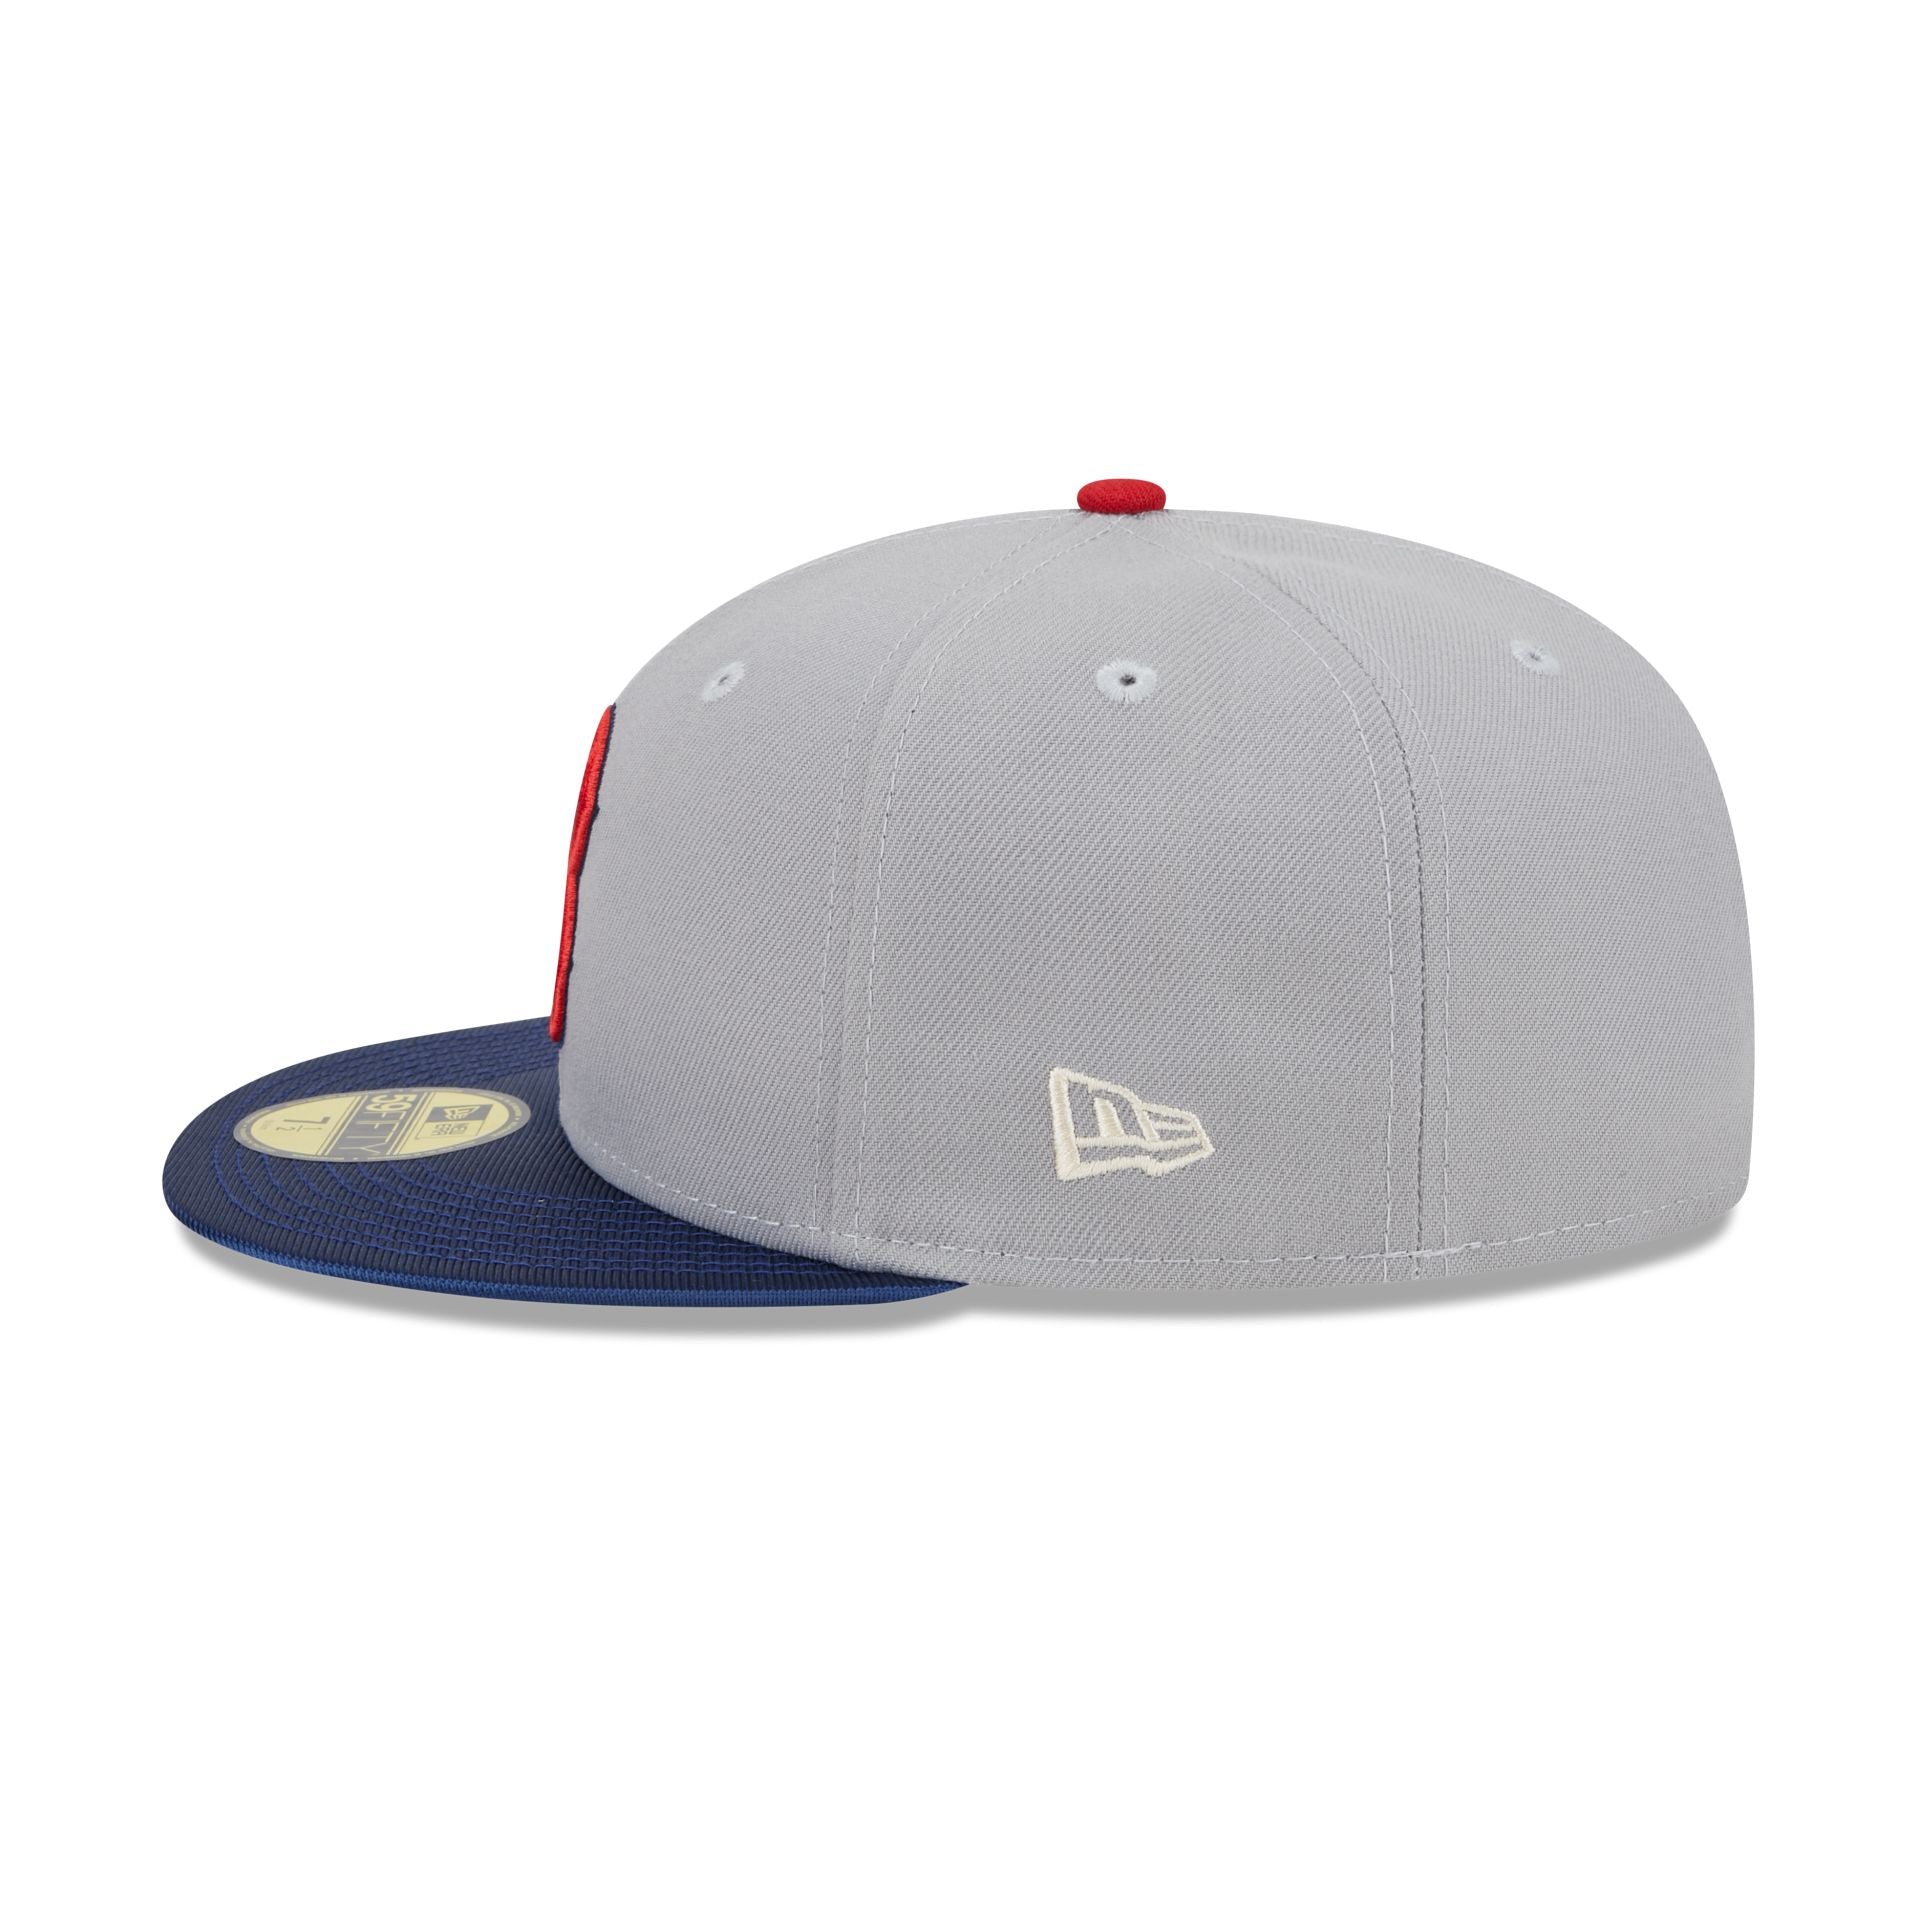 Men's St. Louis Cardinals New Era White/Red Optic 59FIFTY Fitted Hat